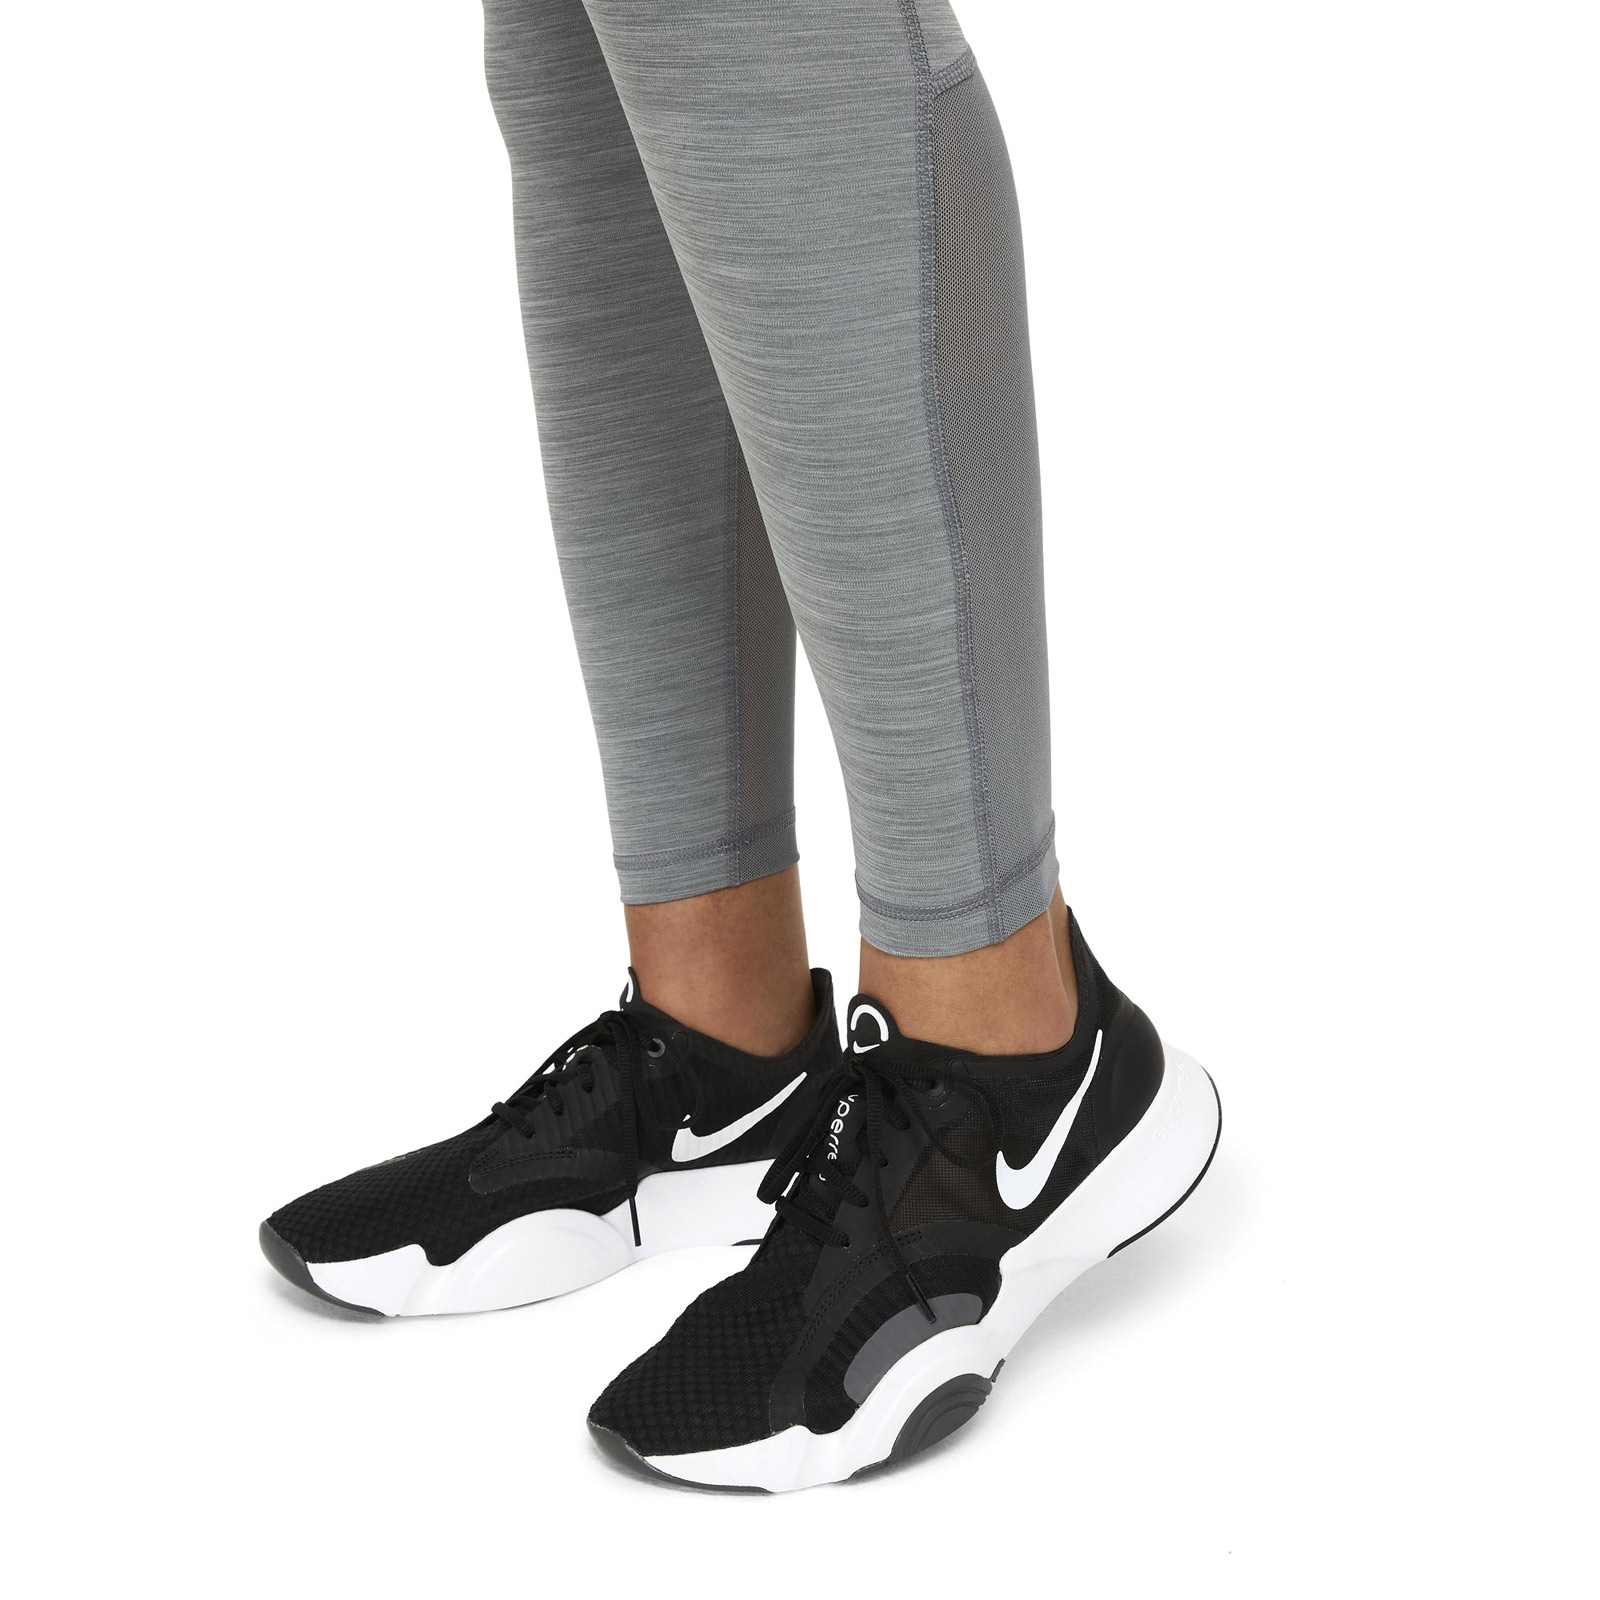 NIKE PRO WOMENS MID-RISE TIGHTS